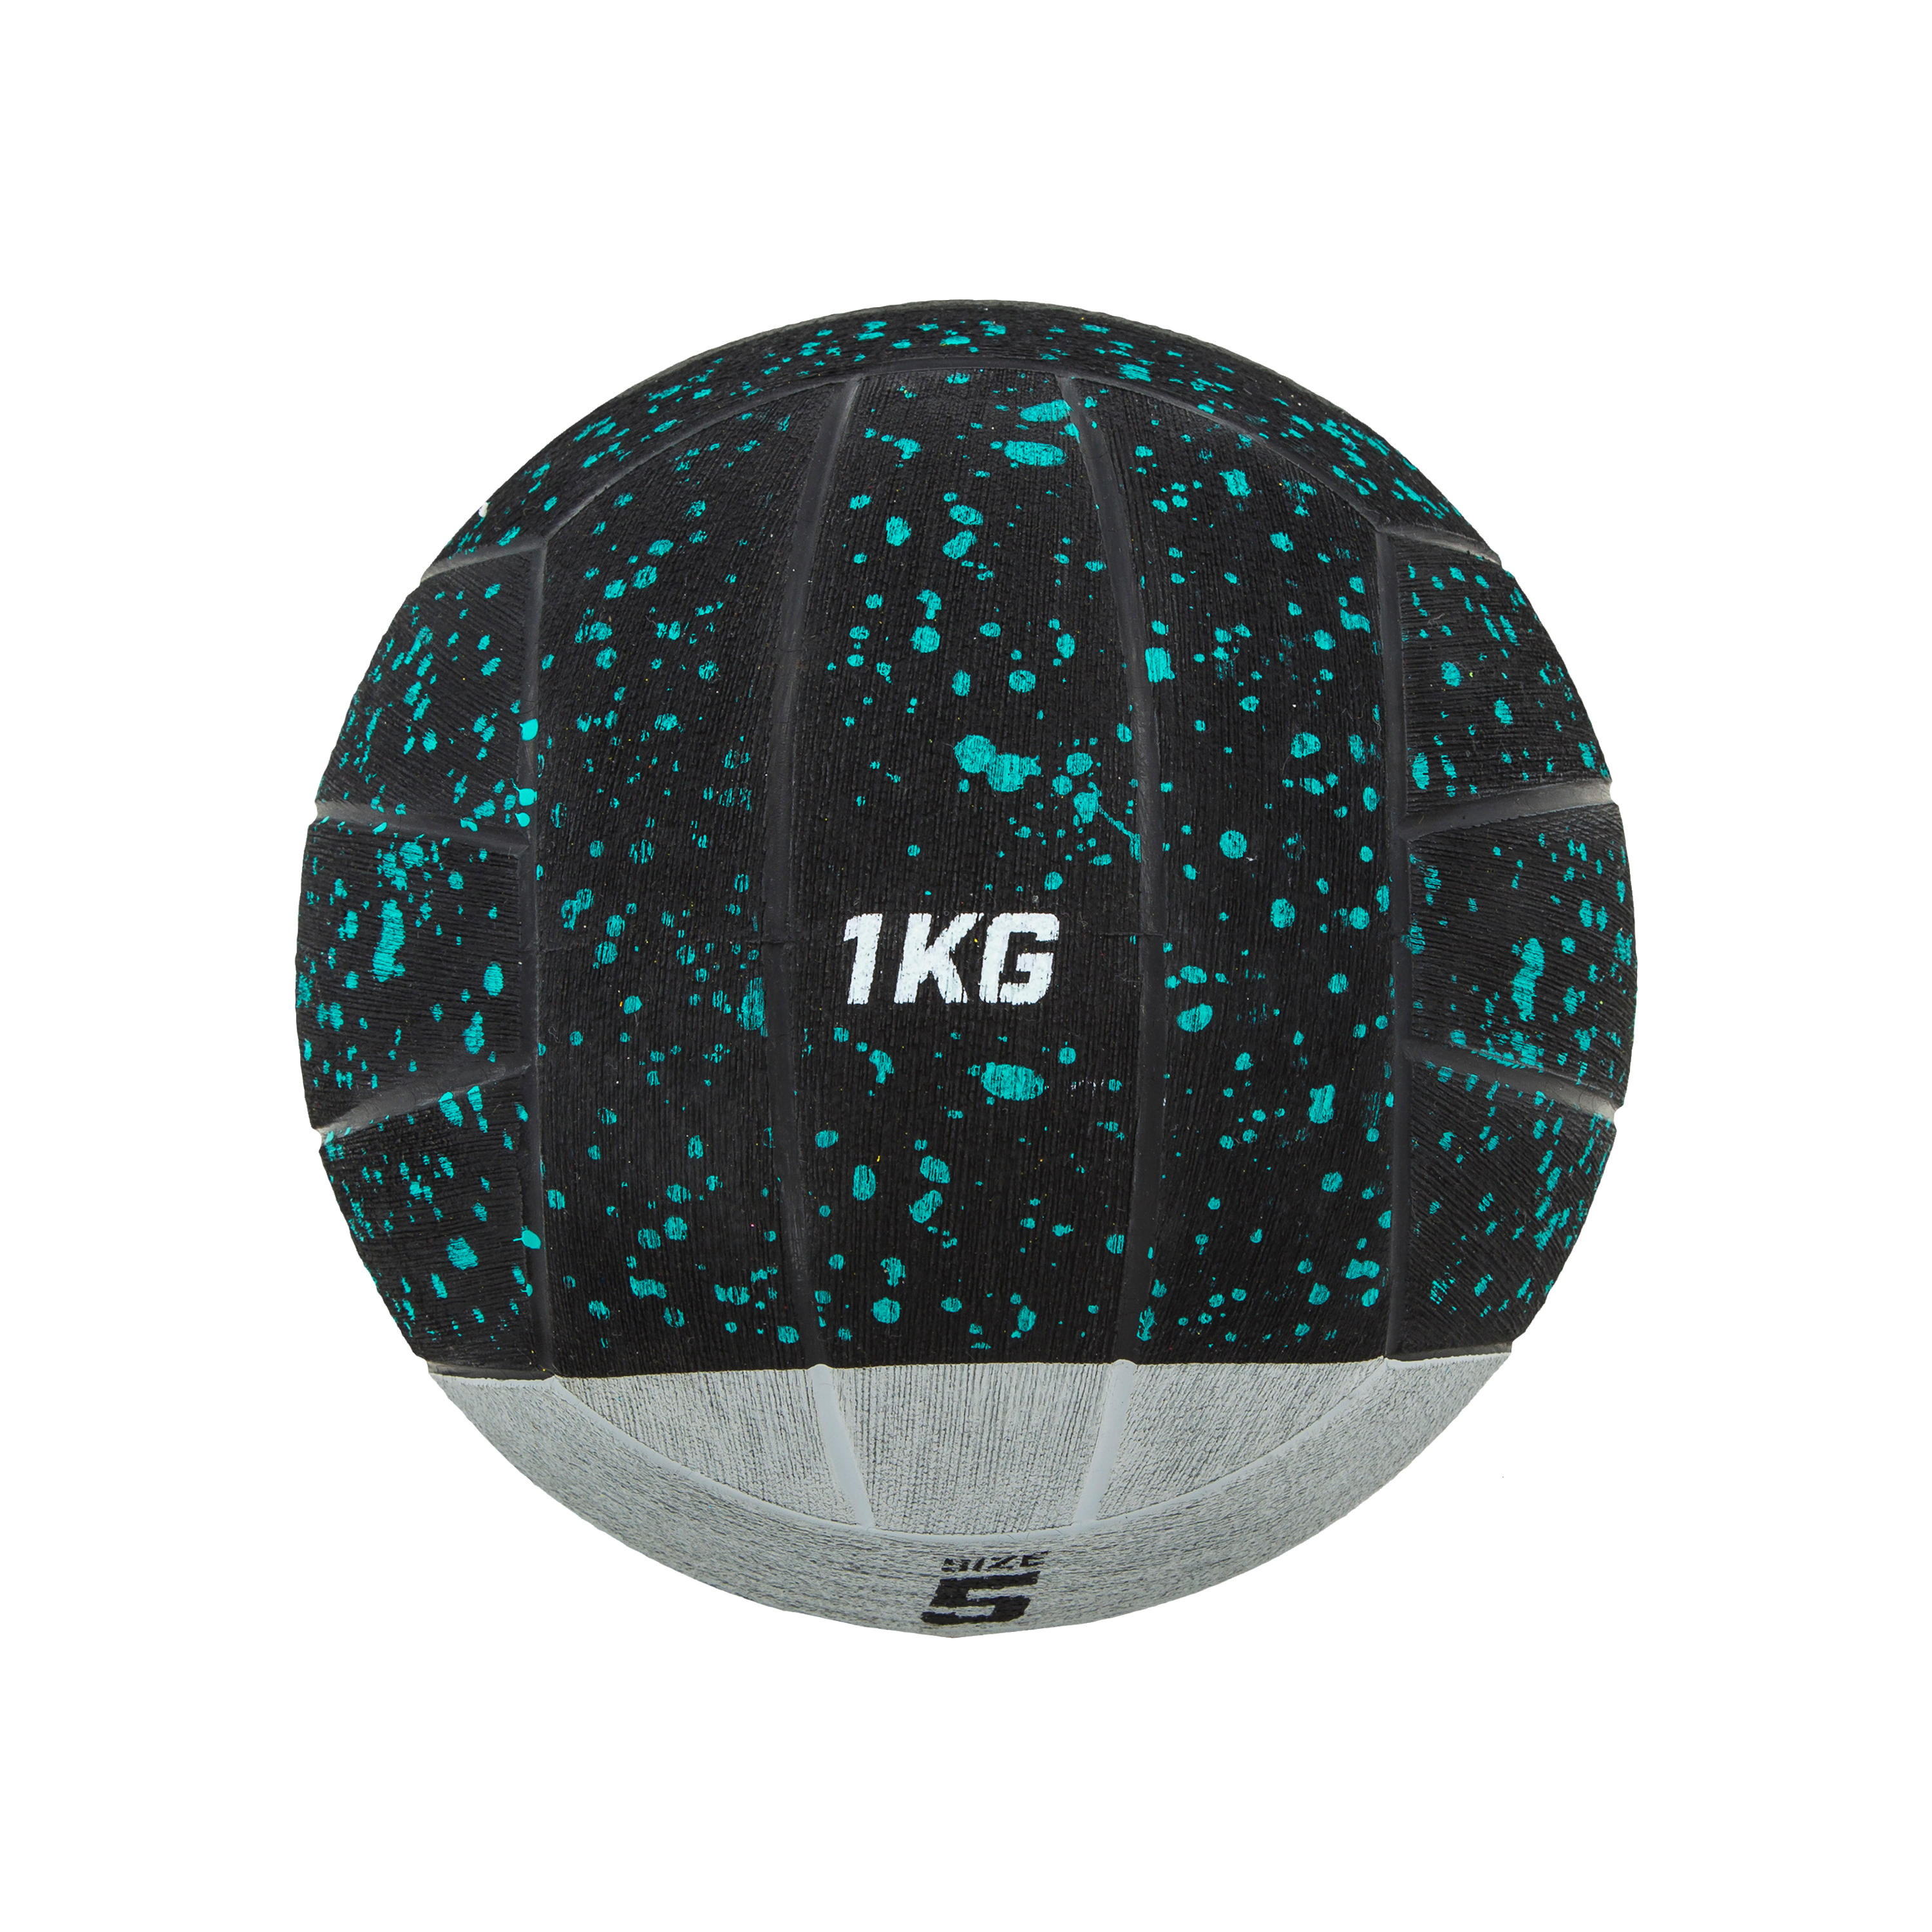 WEIGHTED WATER POLO BALL WP500 1KG SIZE 5 5/6